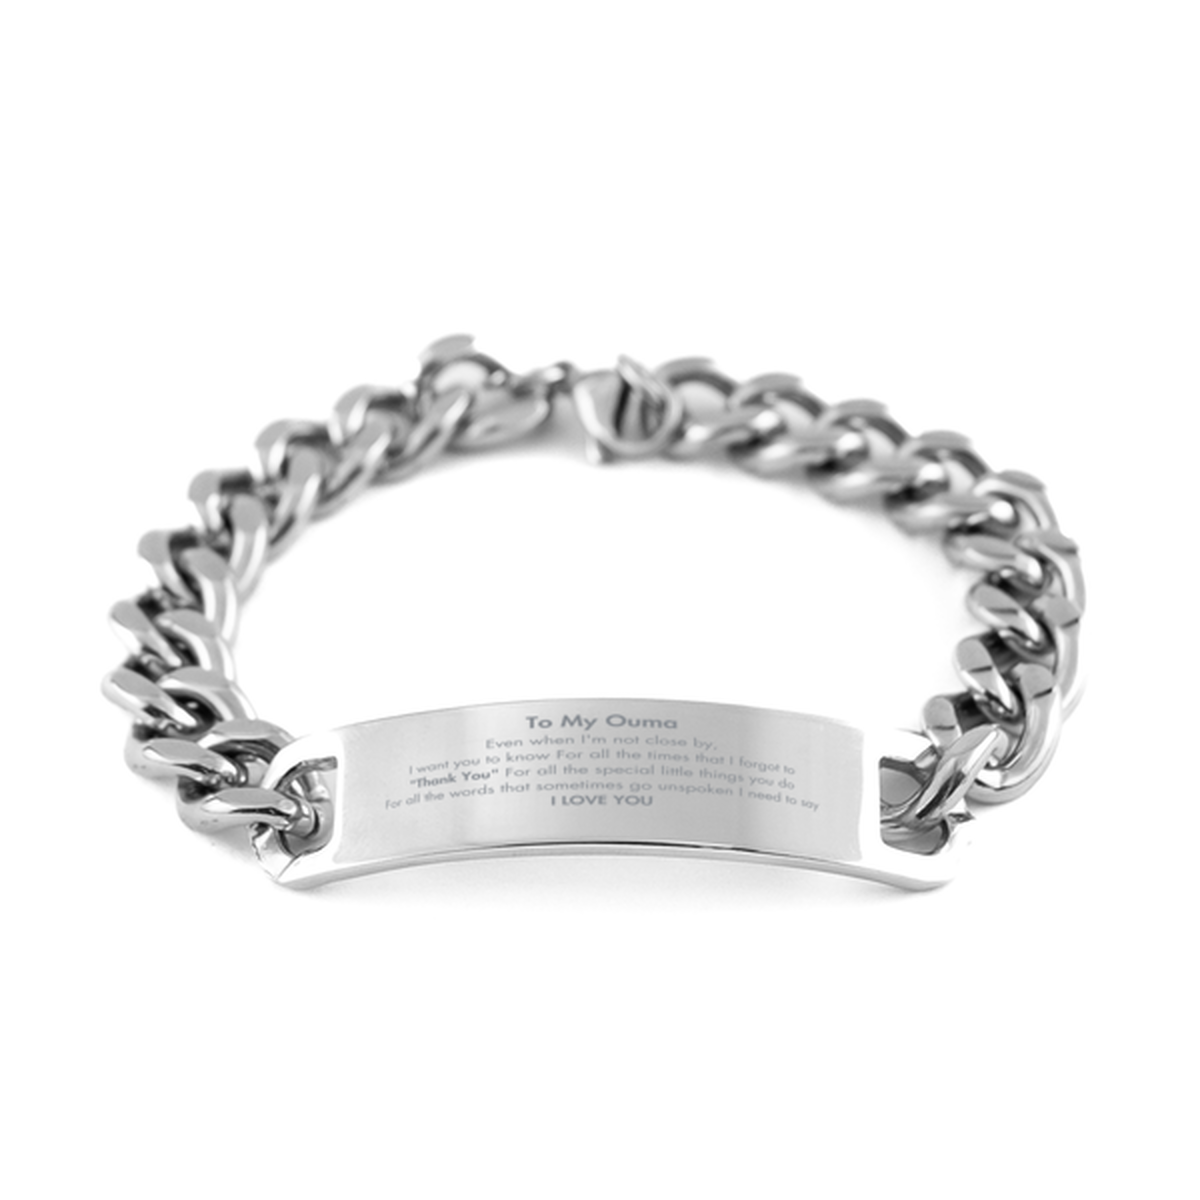 Thank You Gifts for Ouma, Keepsake Cuban Chain Stainless Steel Bracelet Gifts for Ouma Birthday Mother's day Father's Day Ouma For all the words That sometimes go unspoken I need to say I LOVE YOU